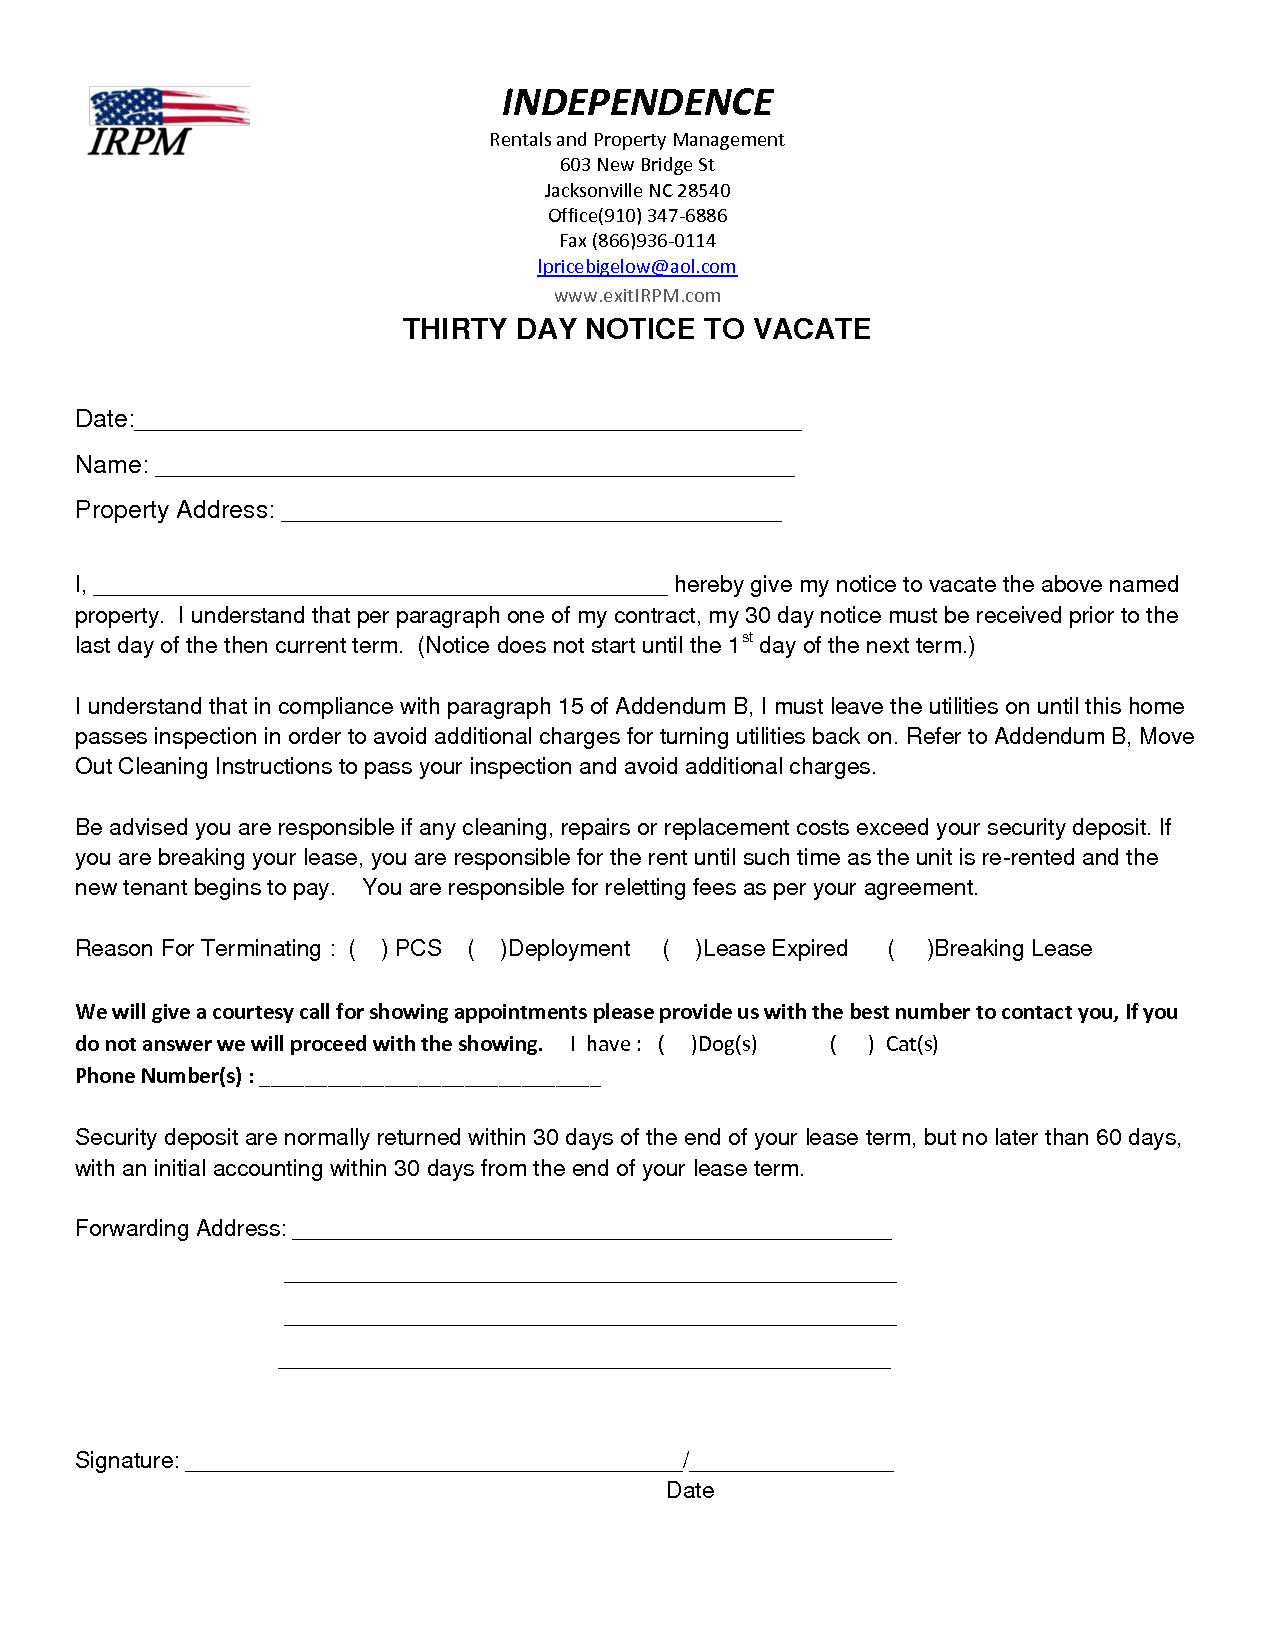 Notice to Vacate Apartment Letter Template - Letter Ent to Move From Apartment Out Notice Vacate Example